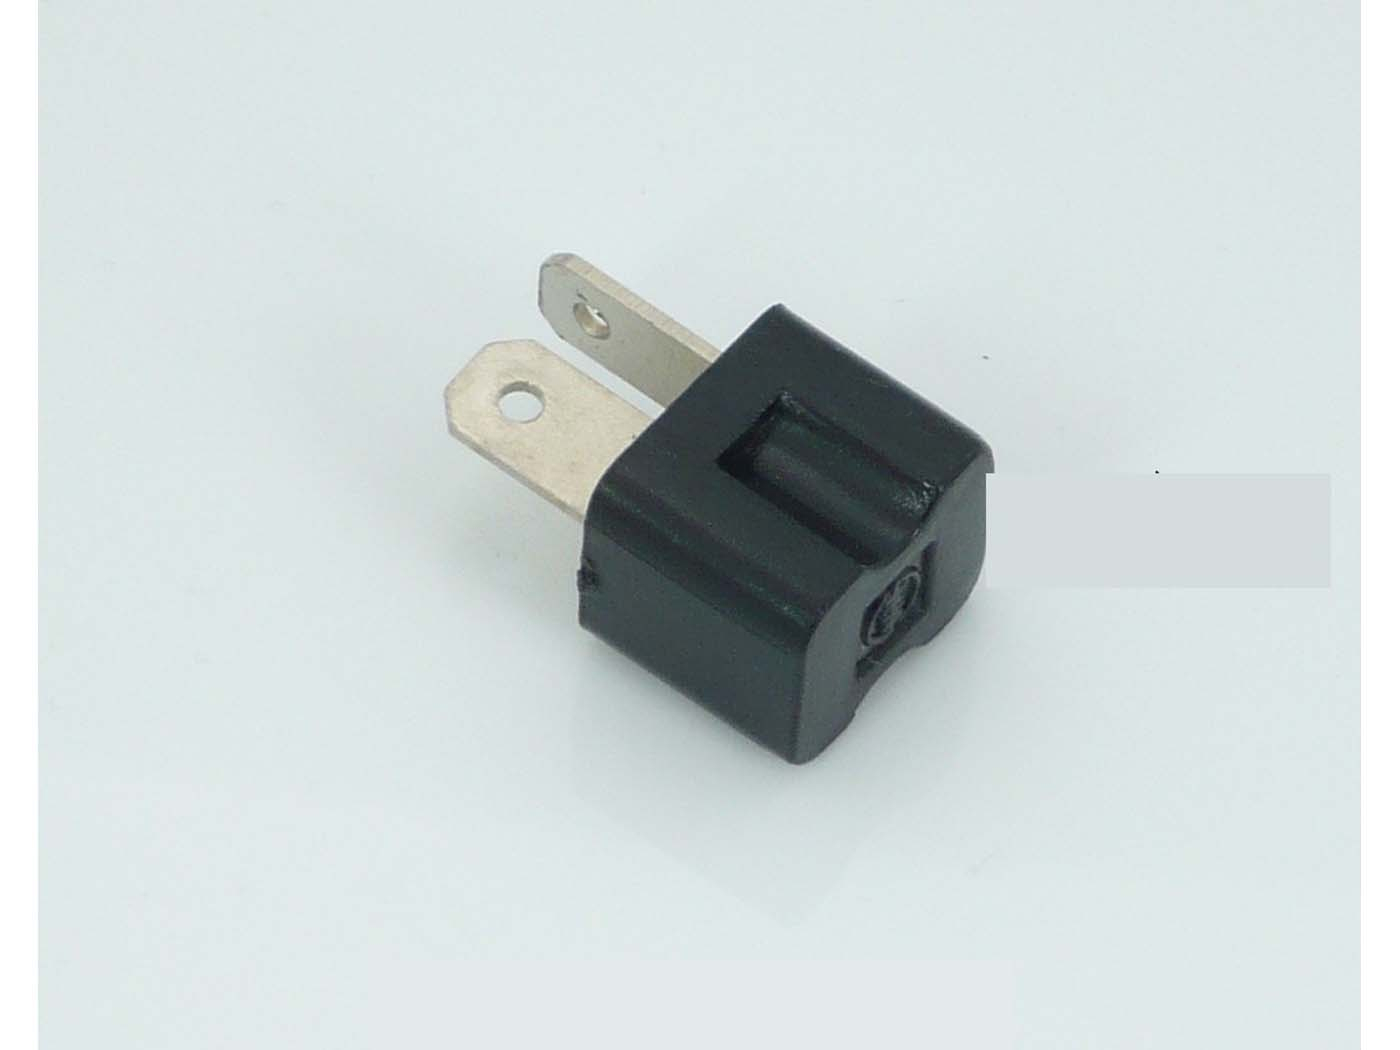 Rectifier Diode For MT 5, 50, MB 80, 125